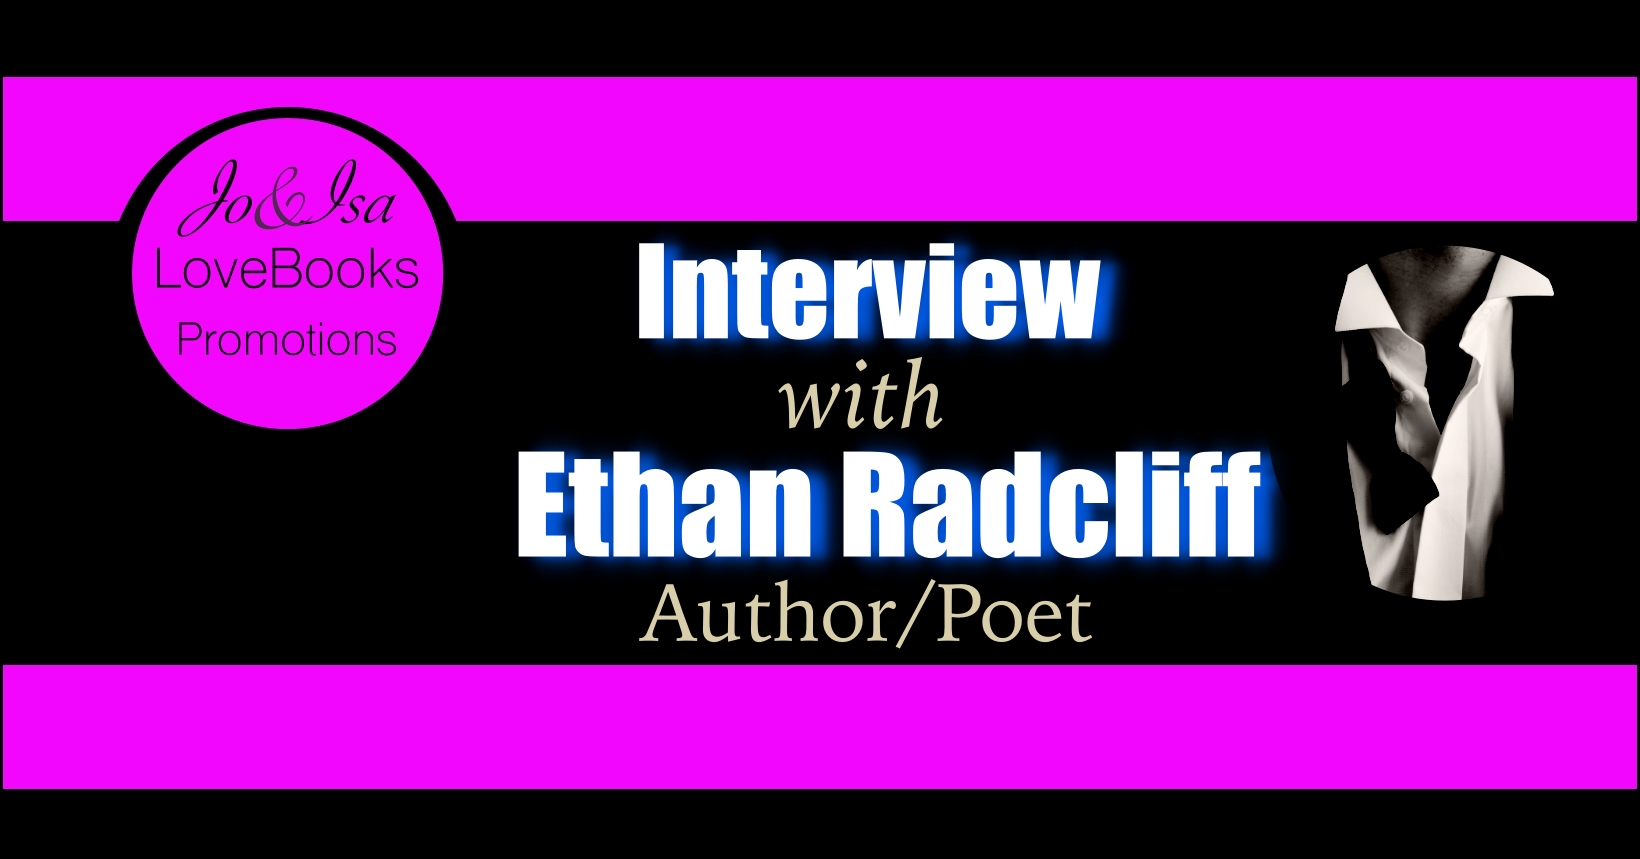 INTERVIEW WITH ETHAN RADCLIFF